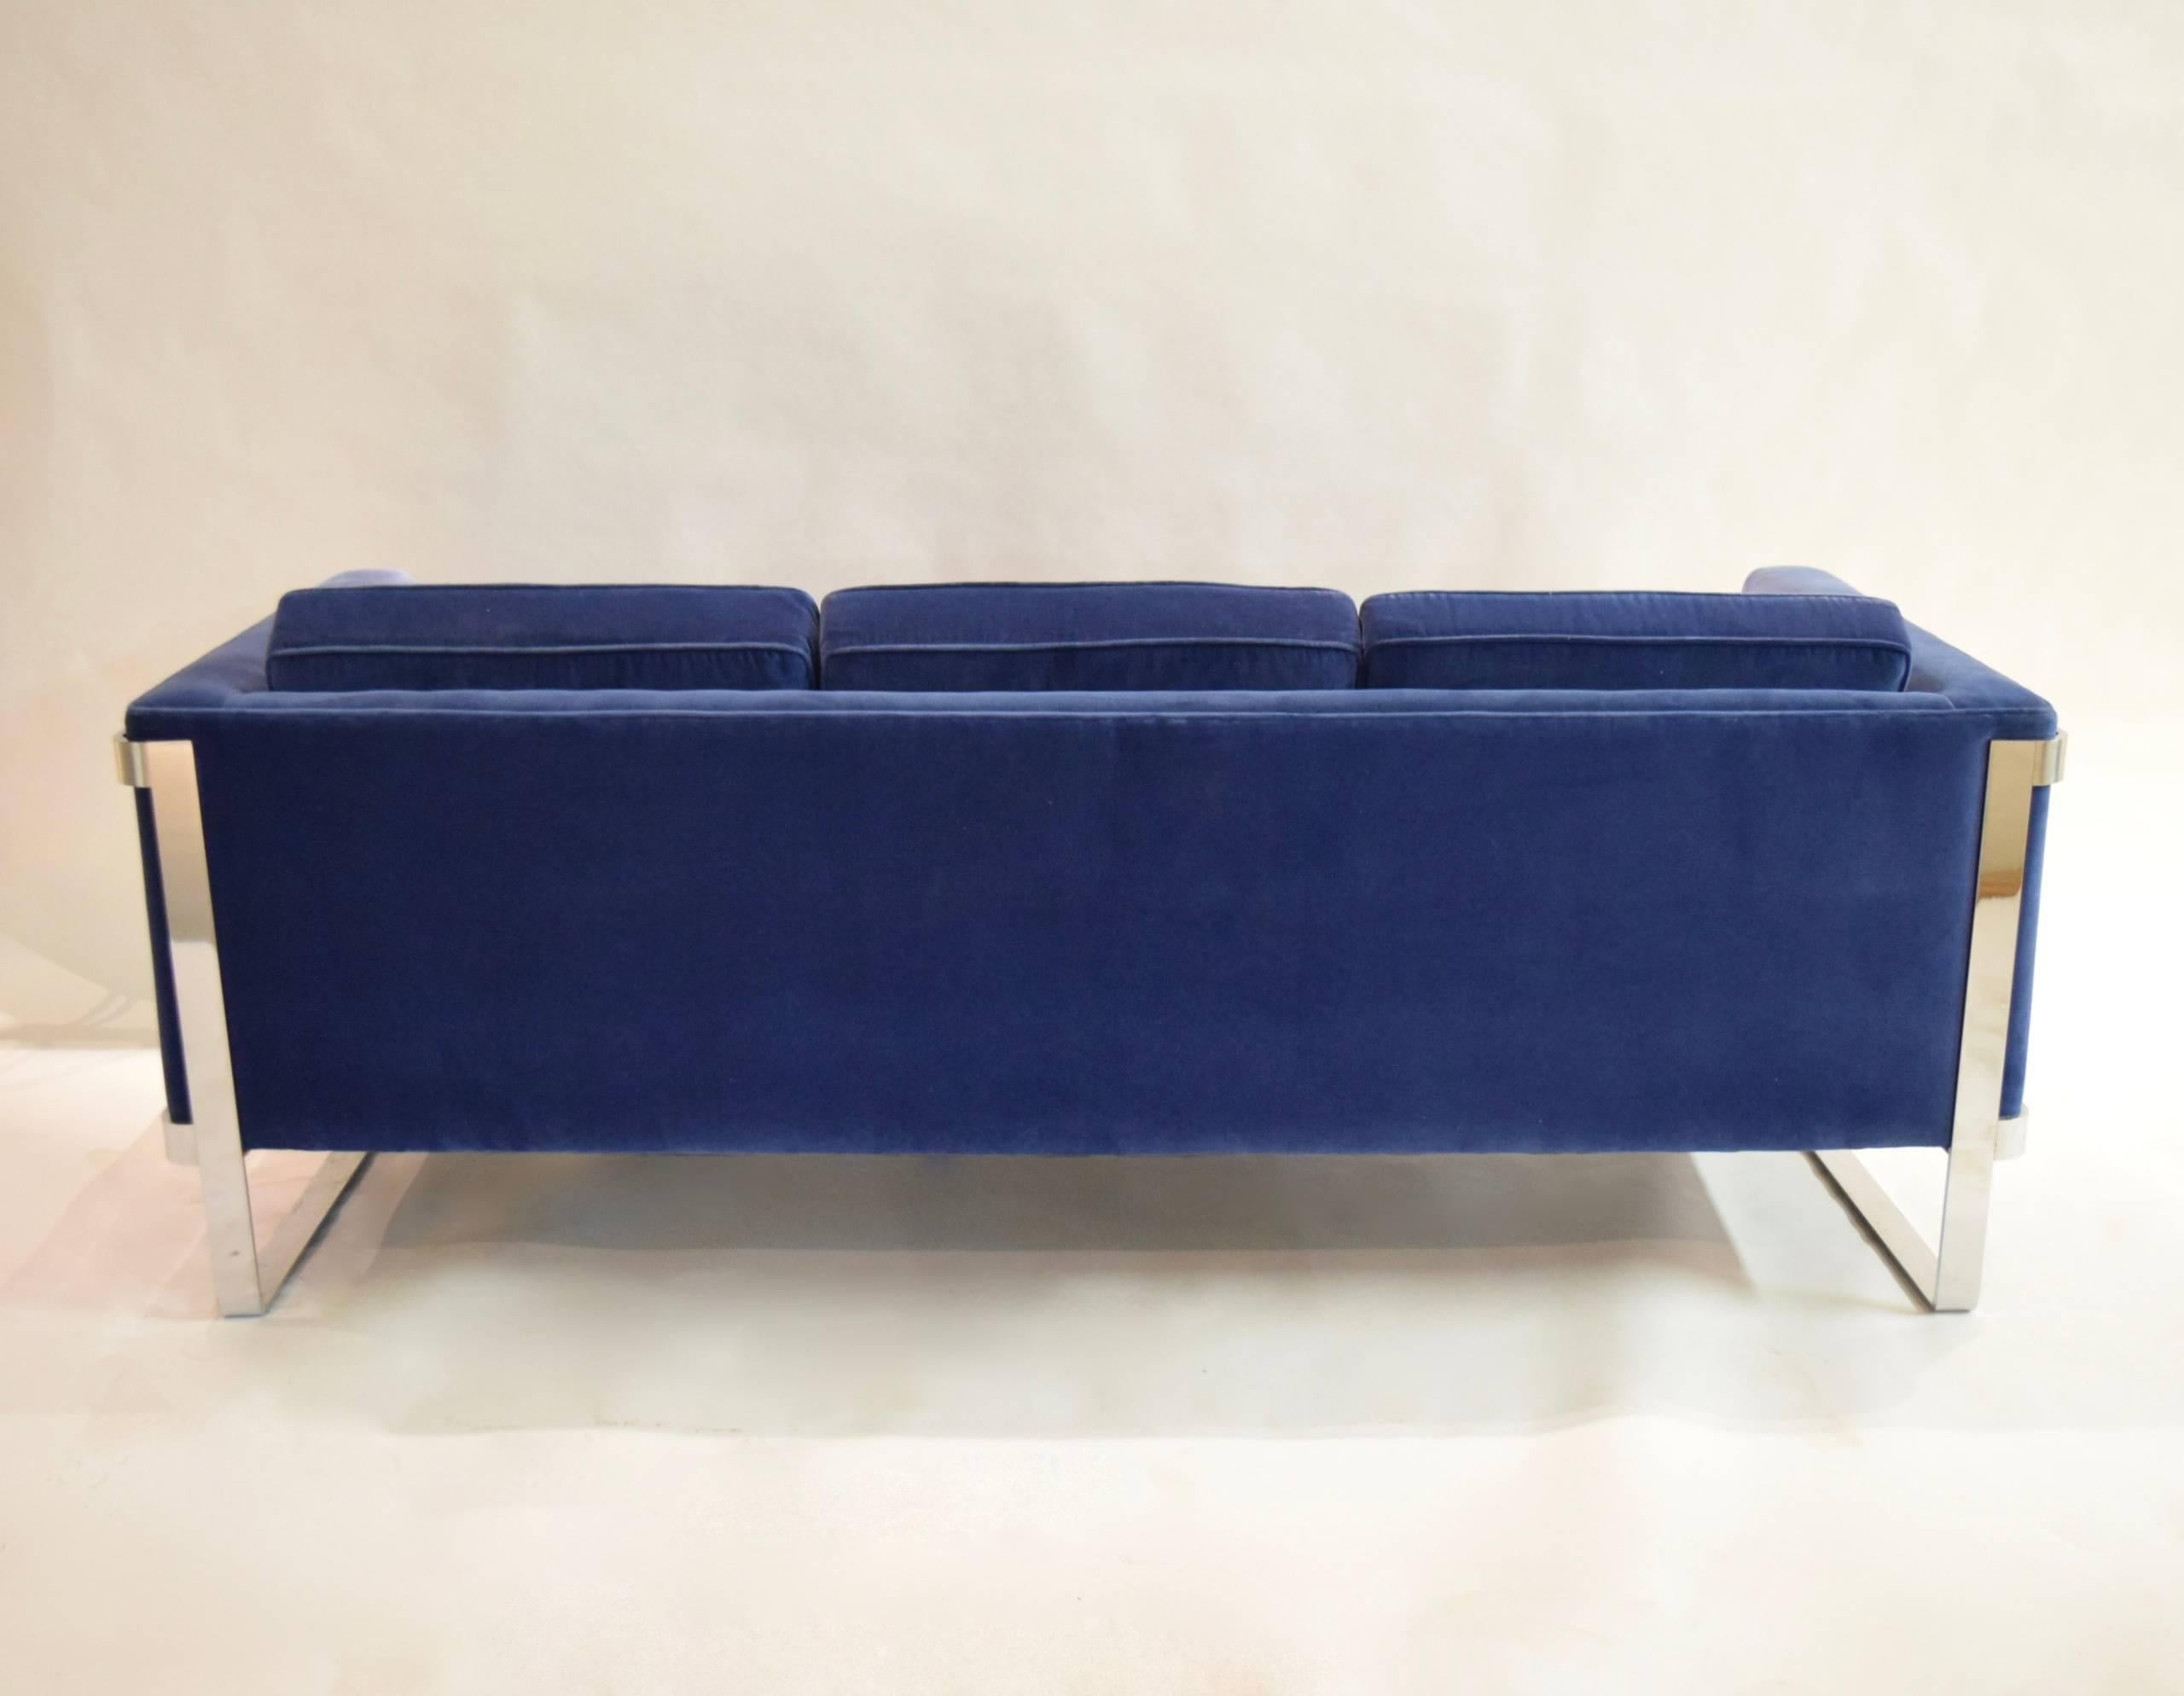 Steel Three-Seat Sofa by Pace Collection, USA Circa 1975